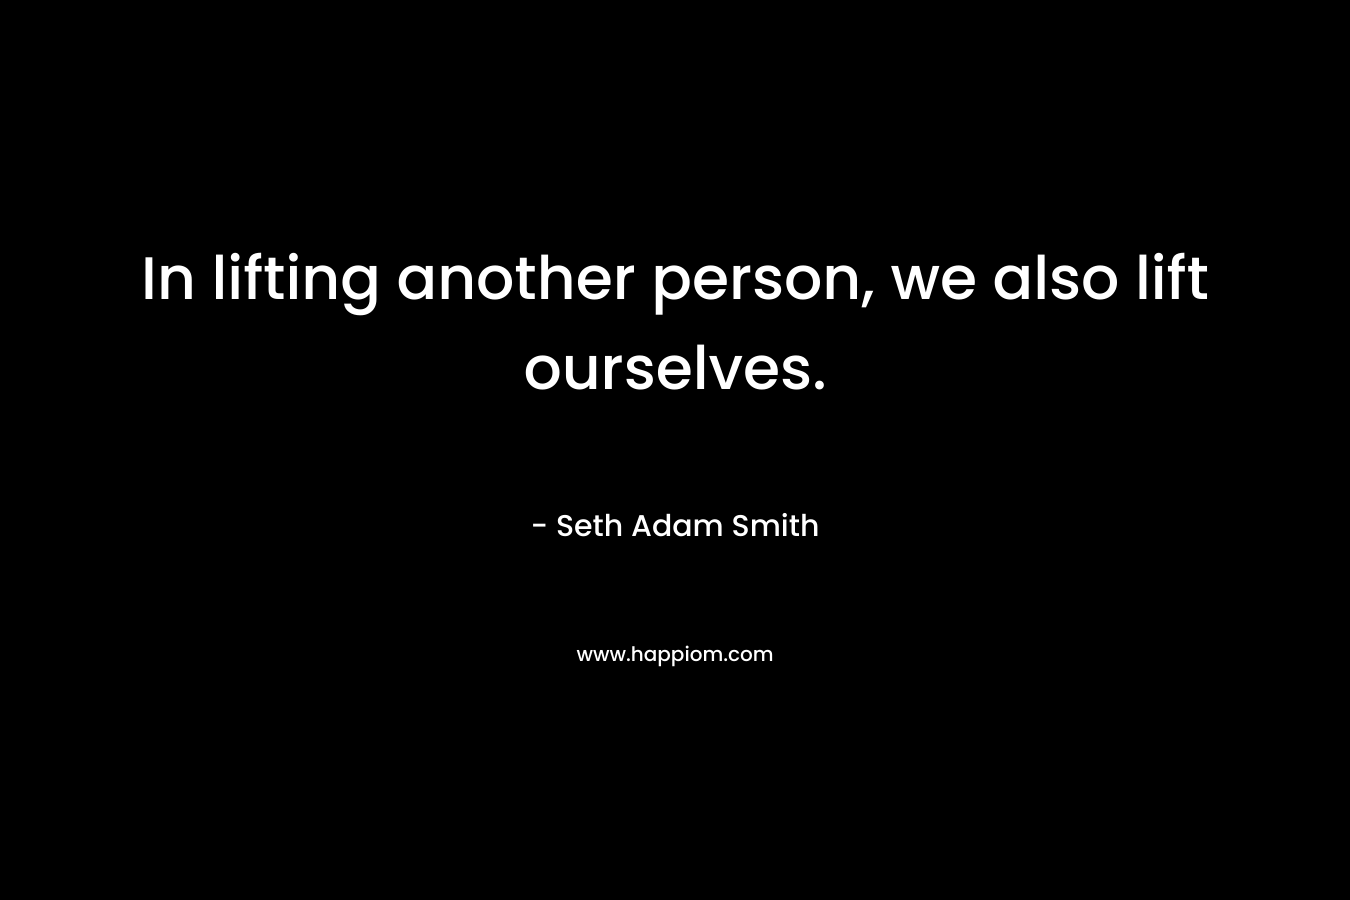 In lifting another person, we also lift ourselves.